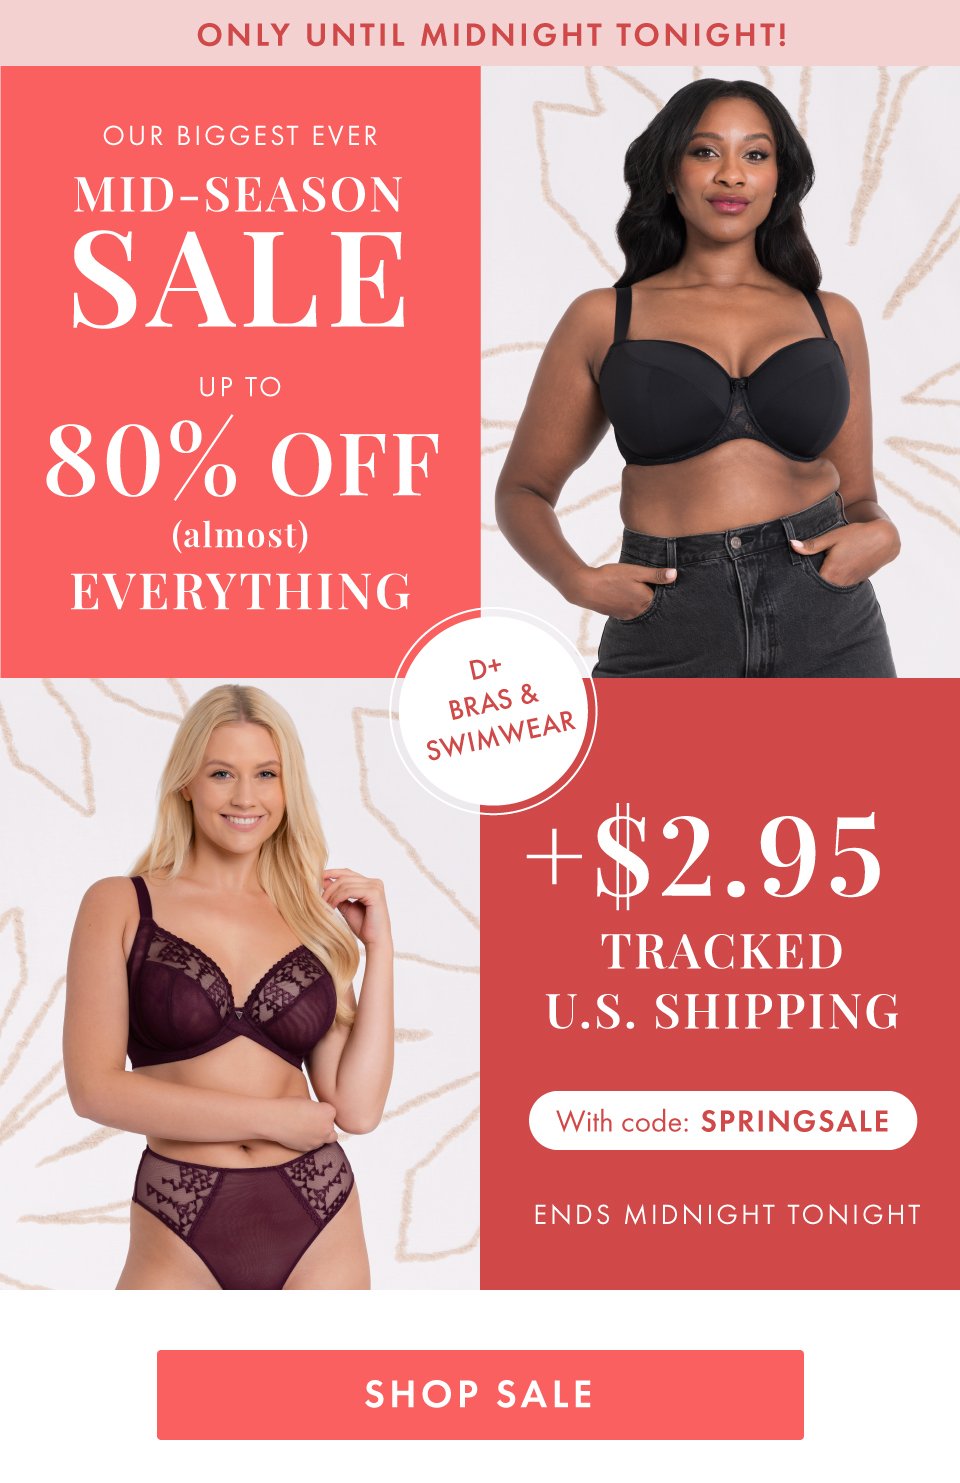 Shop Gossard Lace Bralettes up to 80% Off